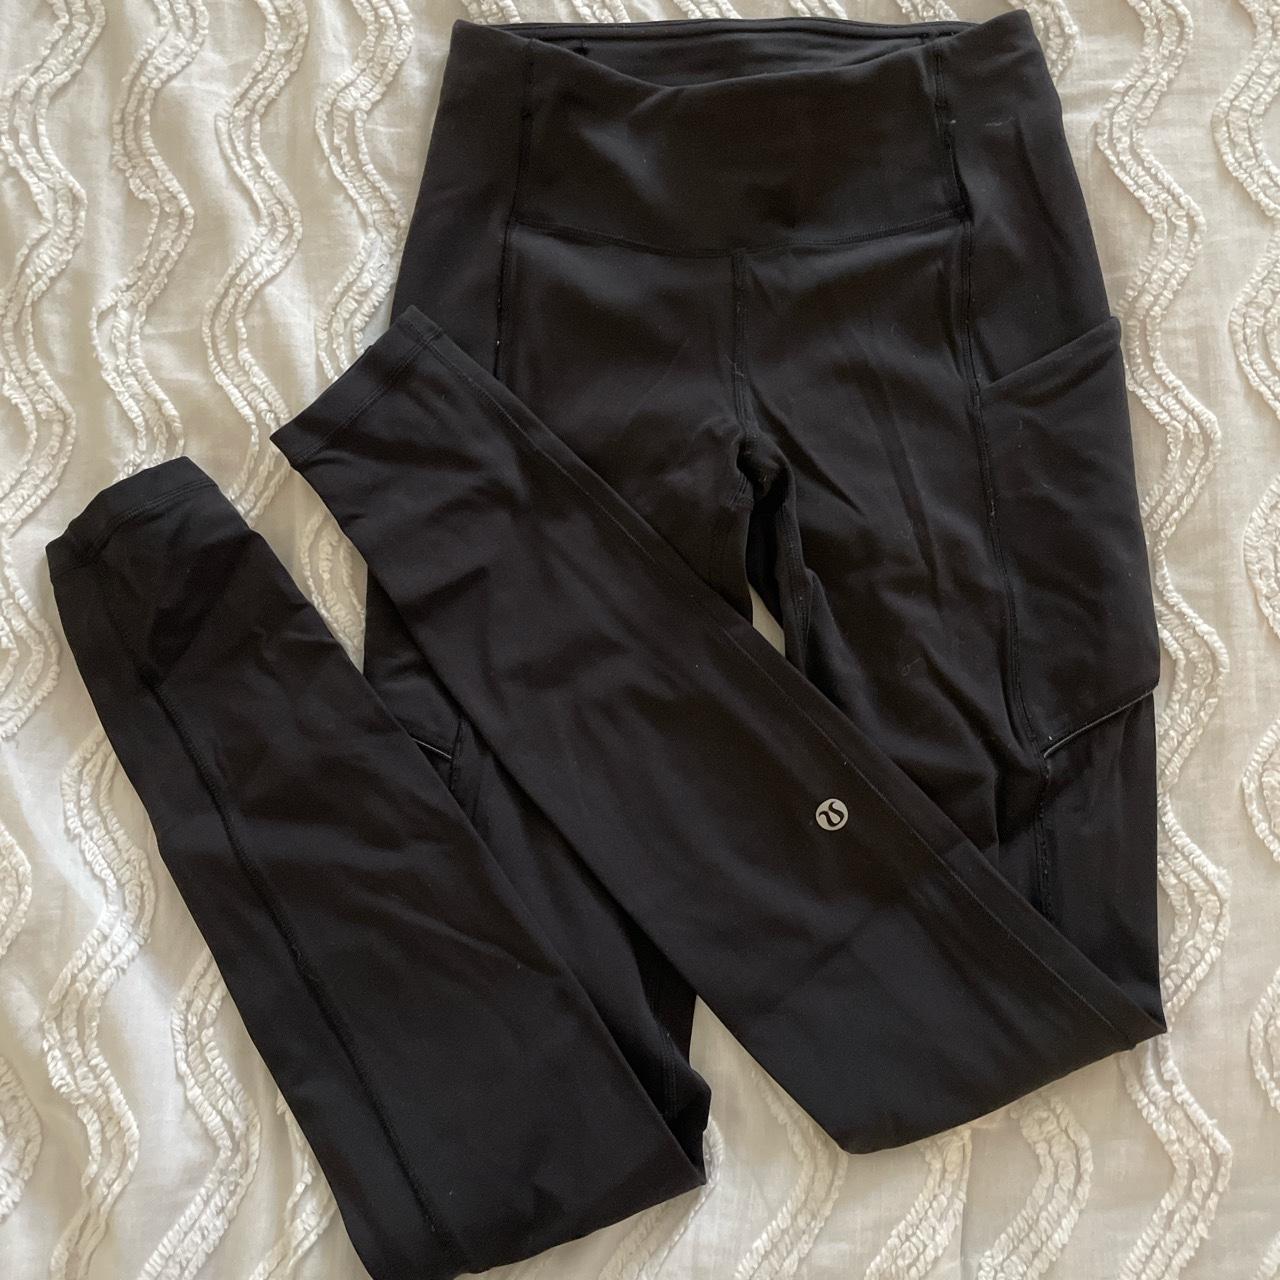 size 0 lululemon fast and free leggings with side - Depop